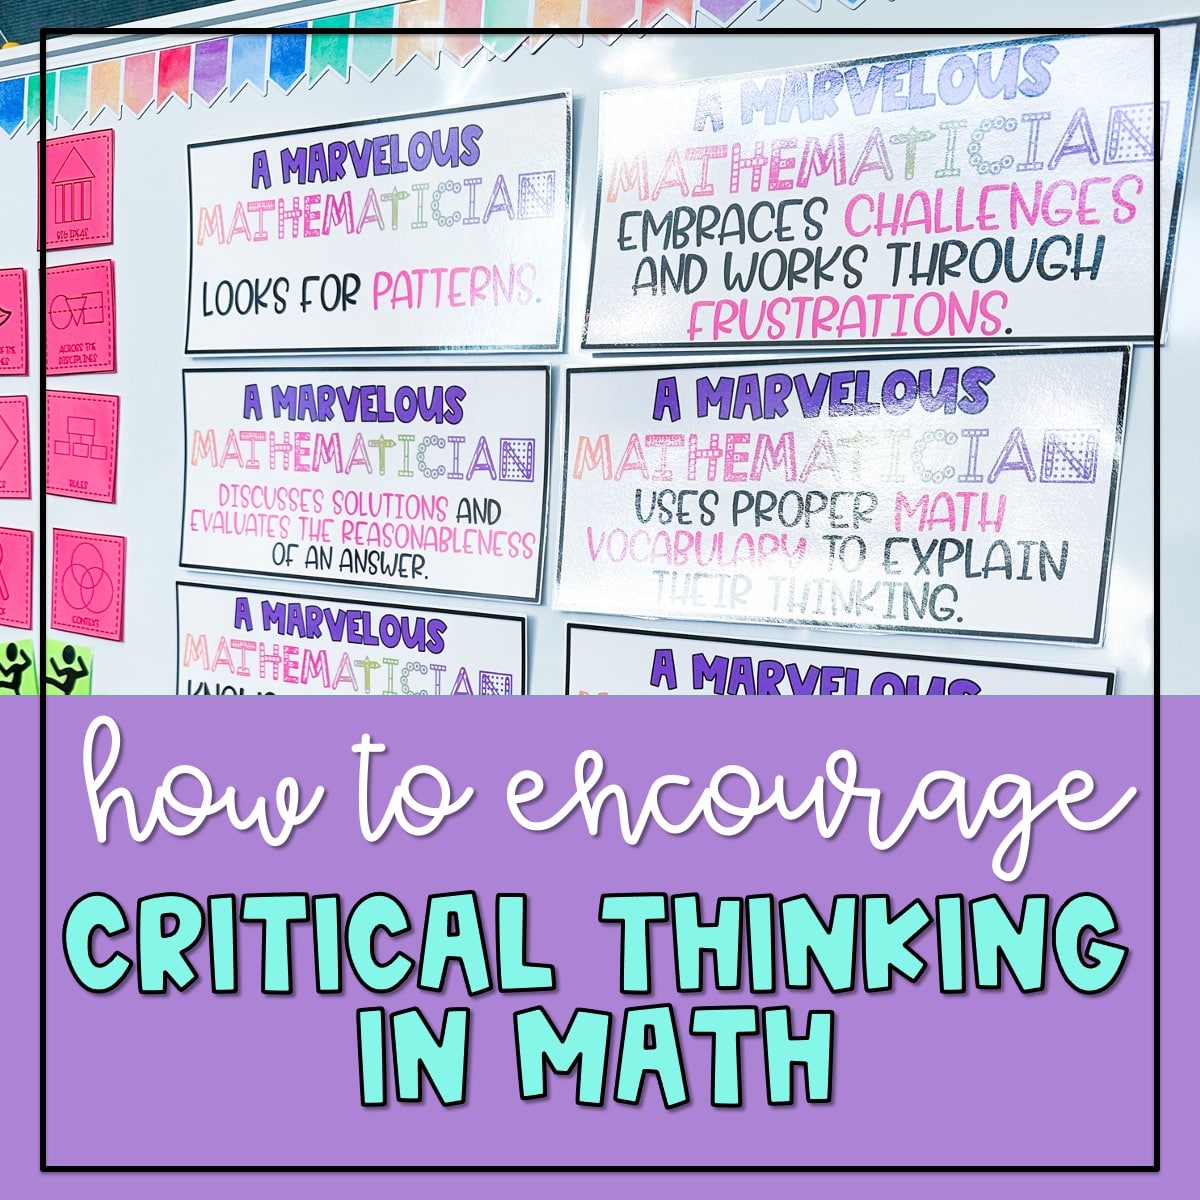 Critical thinking in math helps students learn to analyze and evaluate math concepts, identify patterns and relationships, and explore different strategies.